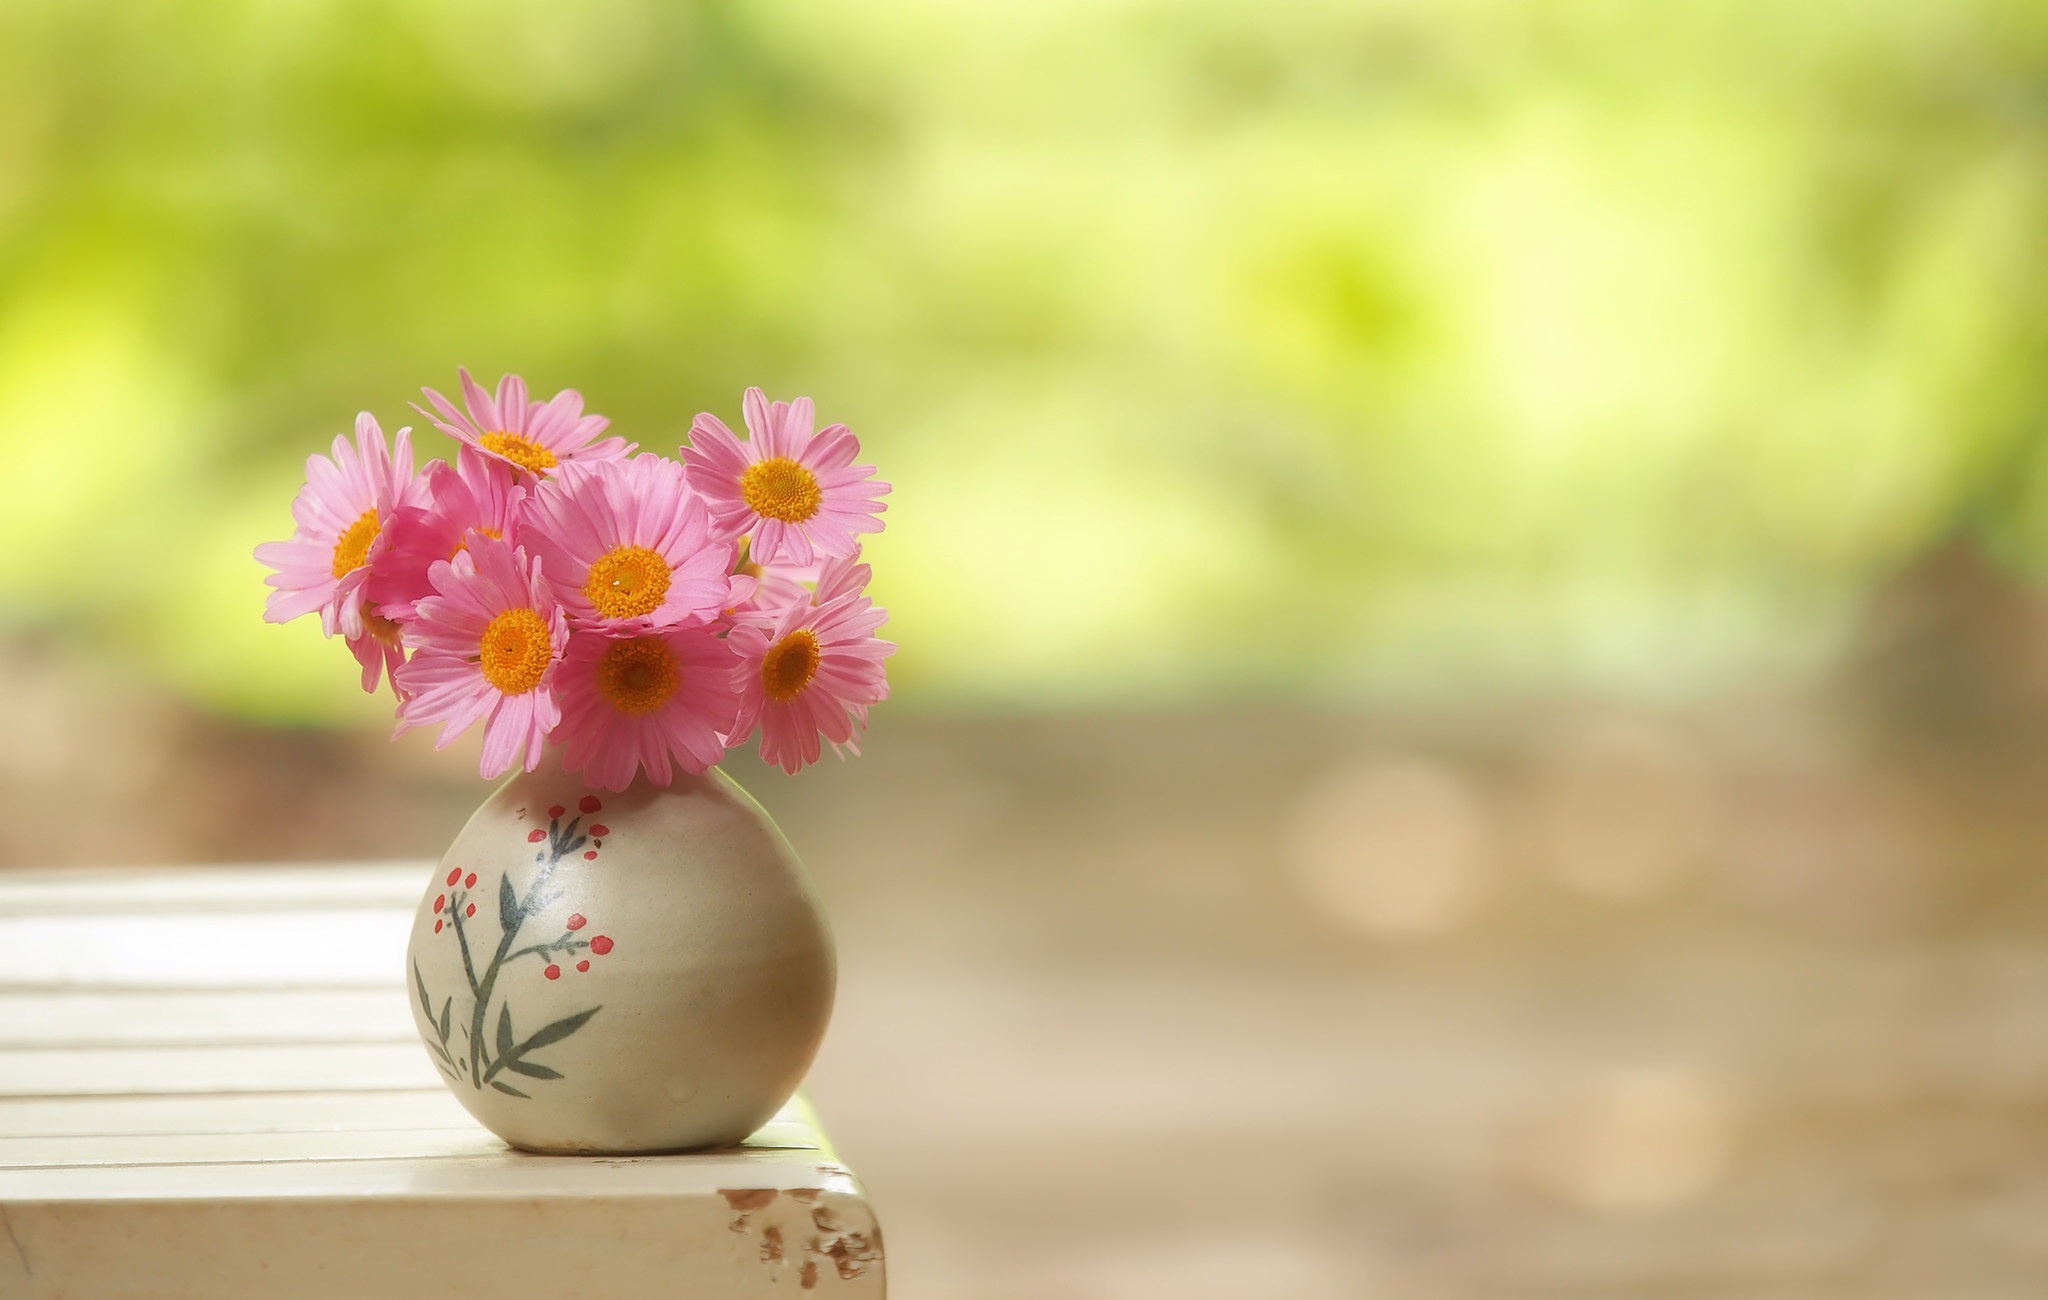 450+ Vase HD Wallpapers and Backgrounds